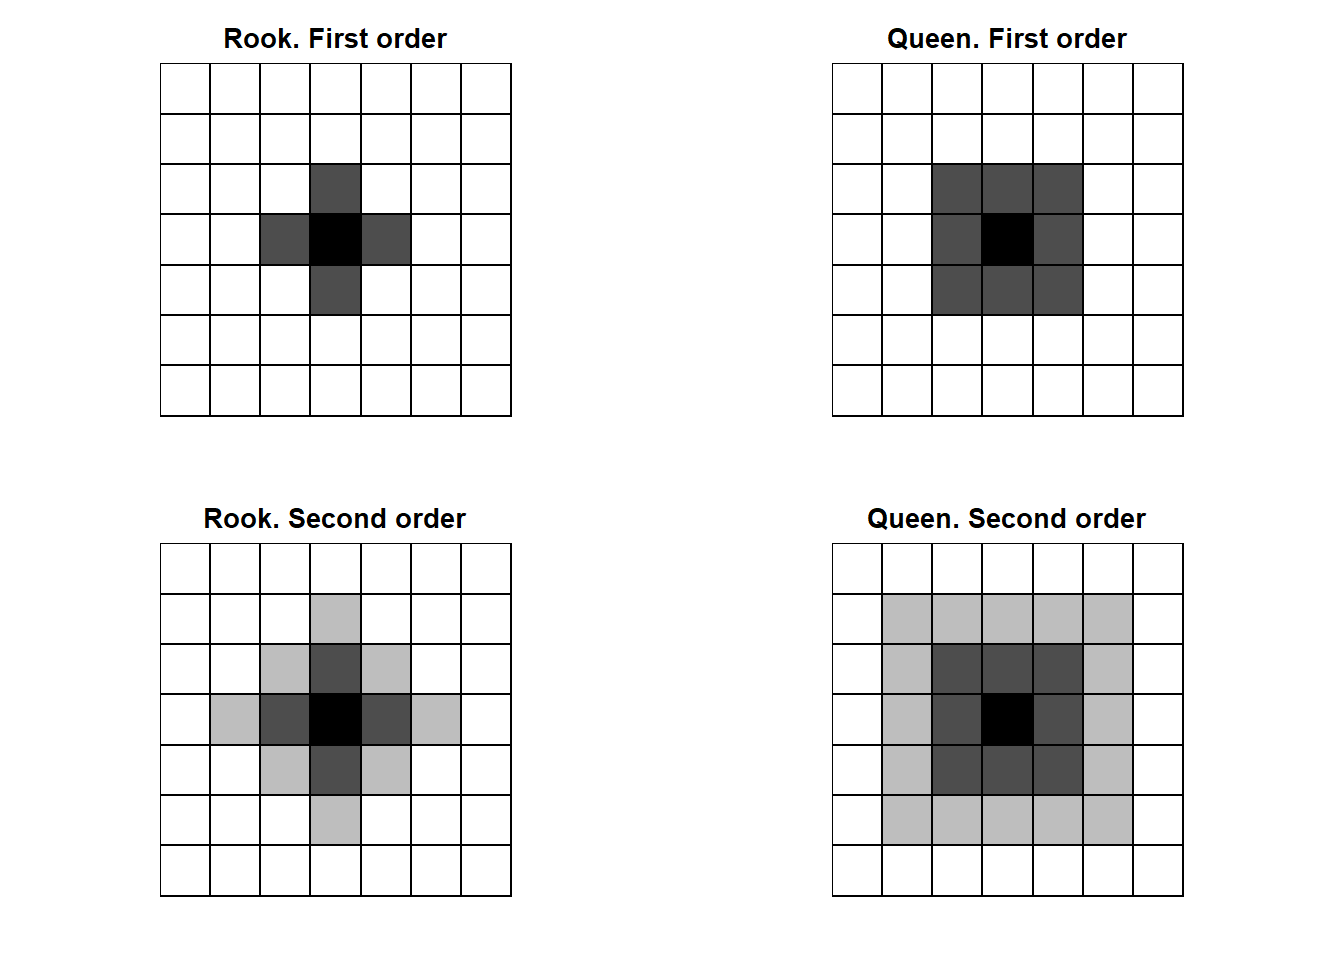 Rook and Queen neighbors of first (dark gray) and second (light gray) order.